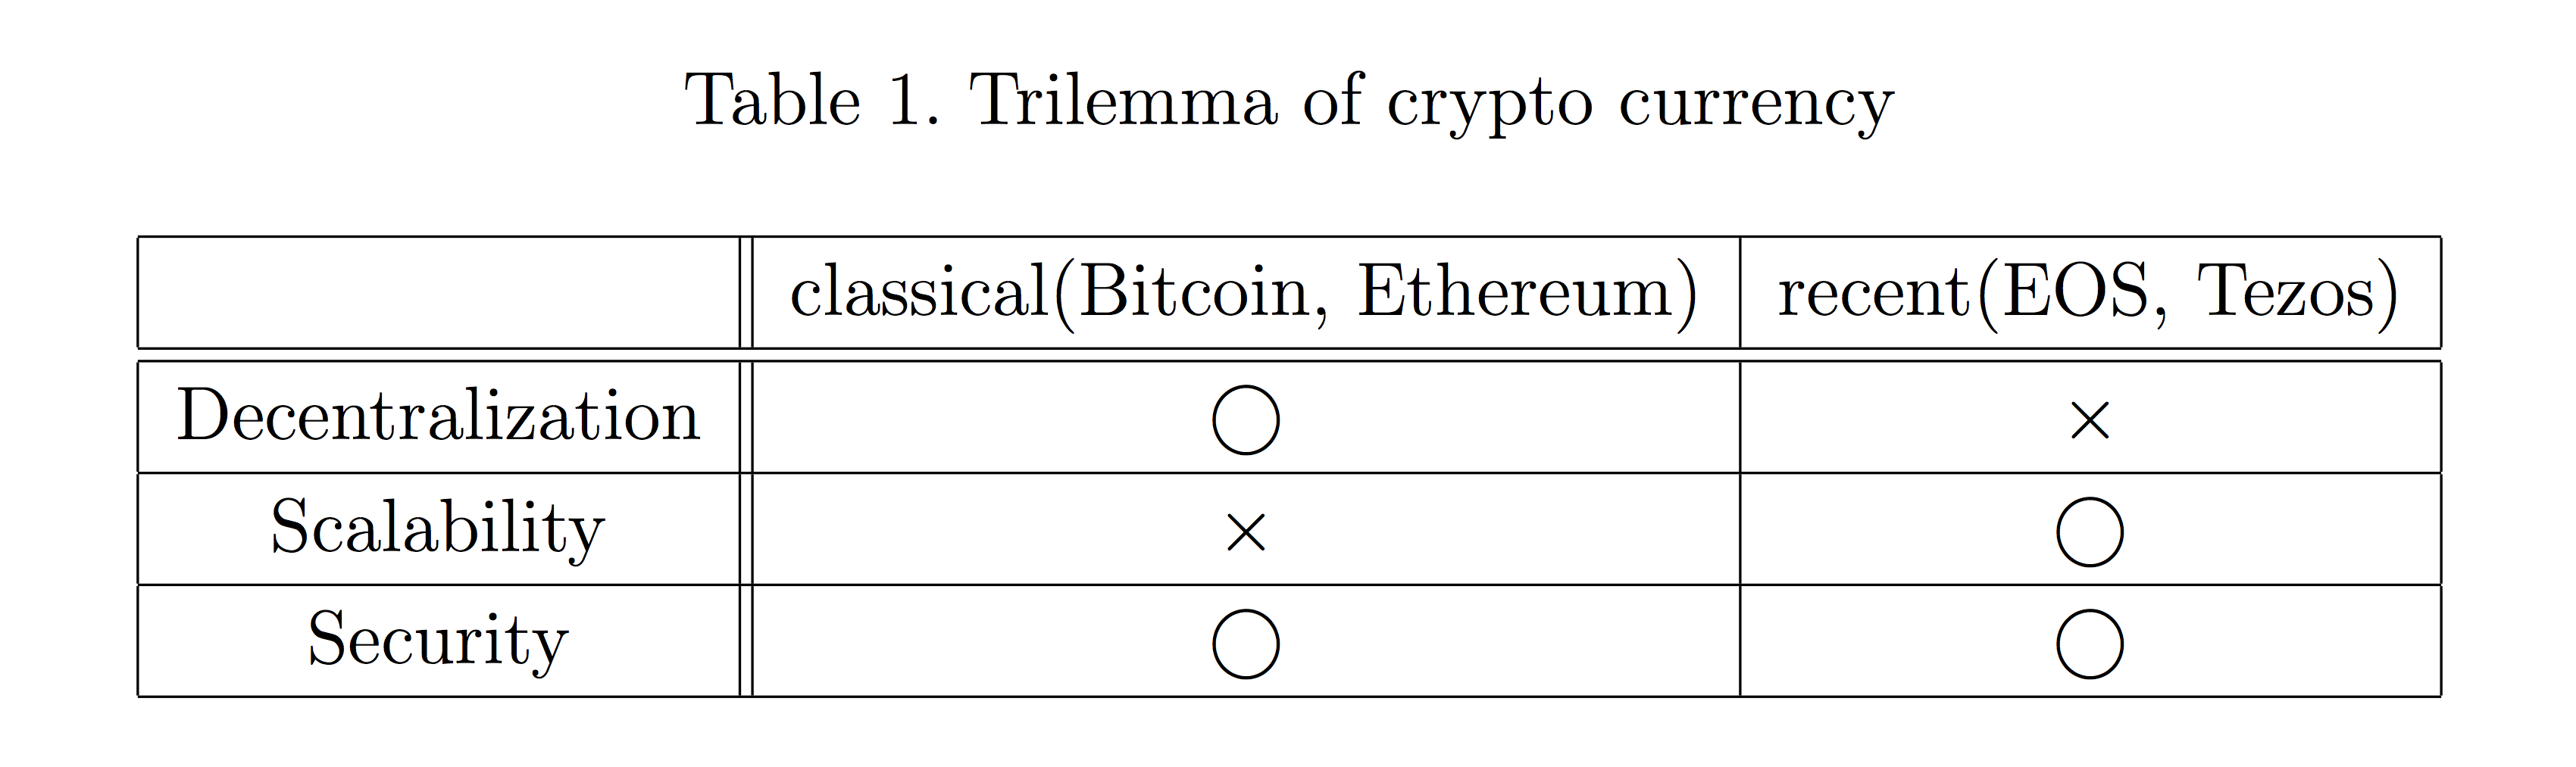 Table 1. Trilemma of crypto currency